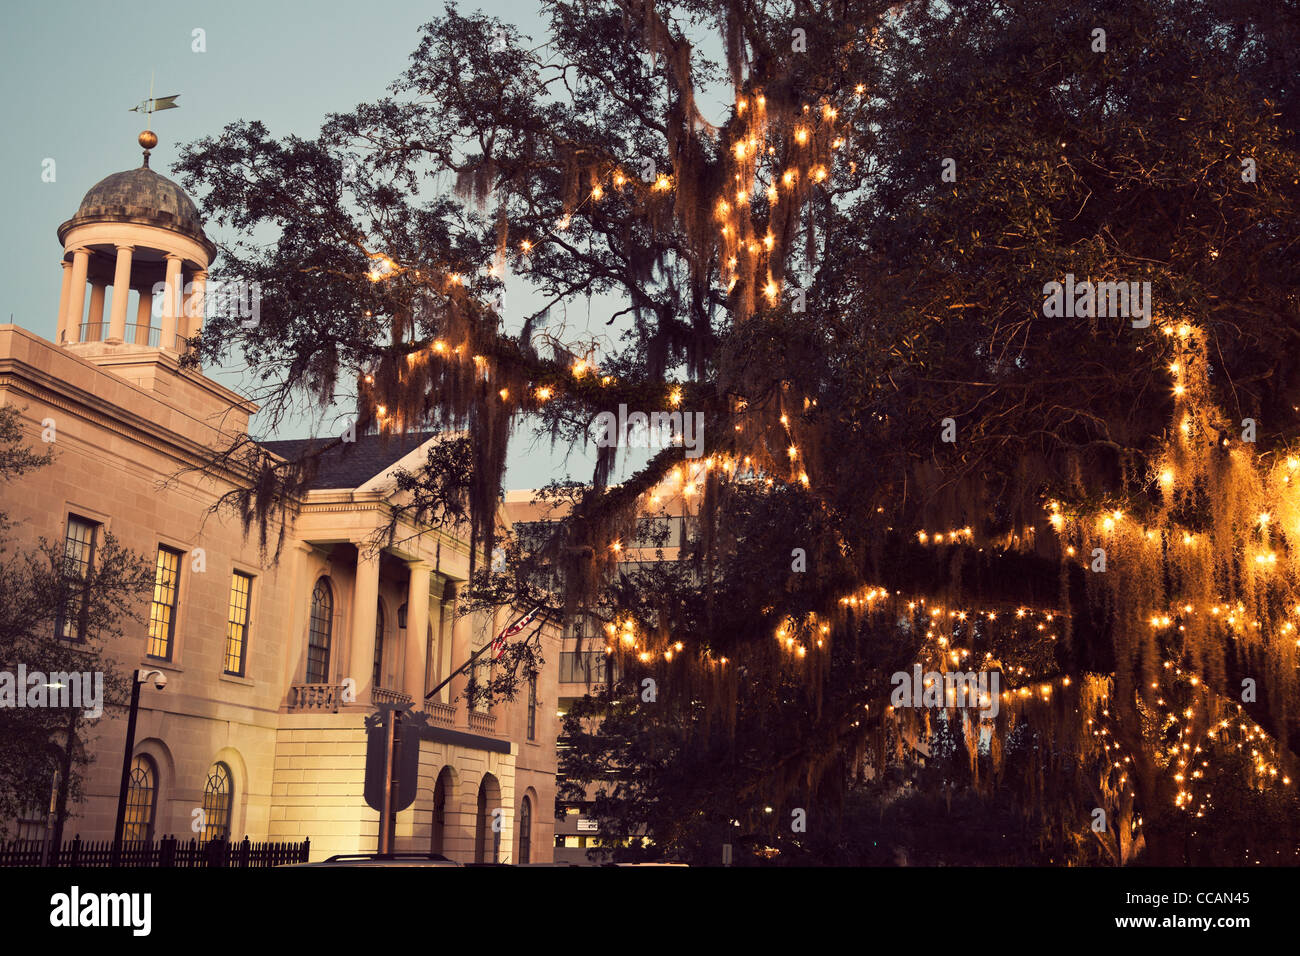 Courthouse in downtown Tallahassee Stock Photo